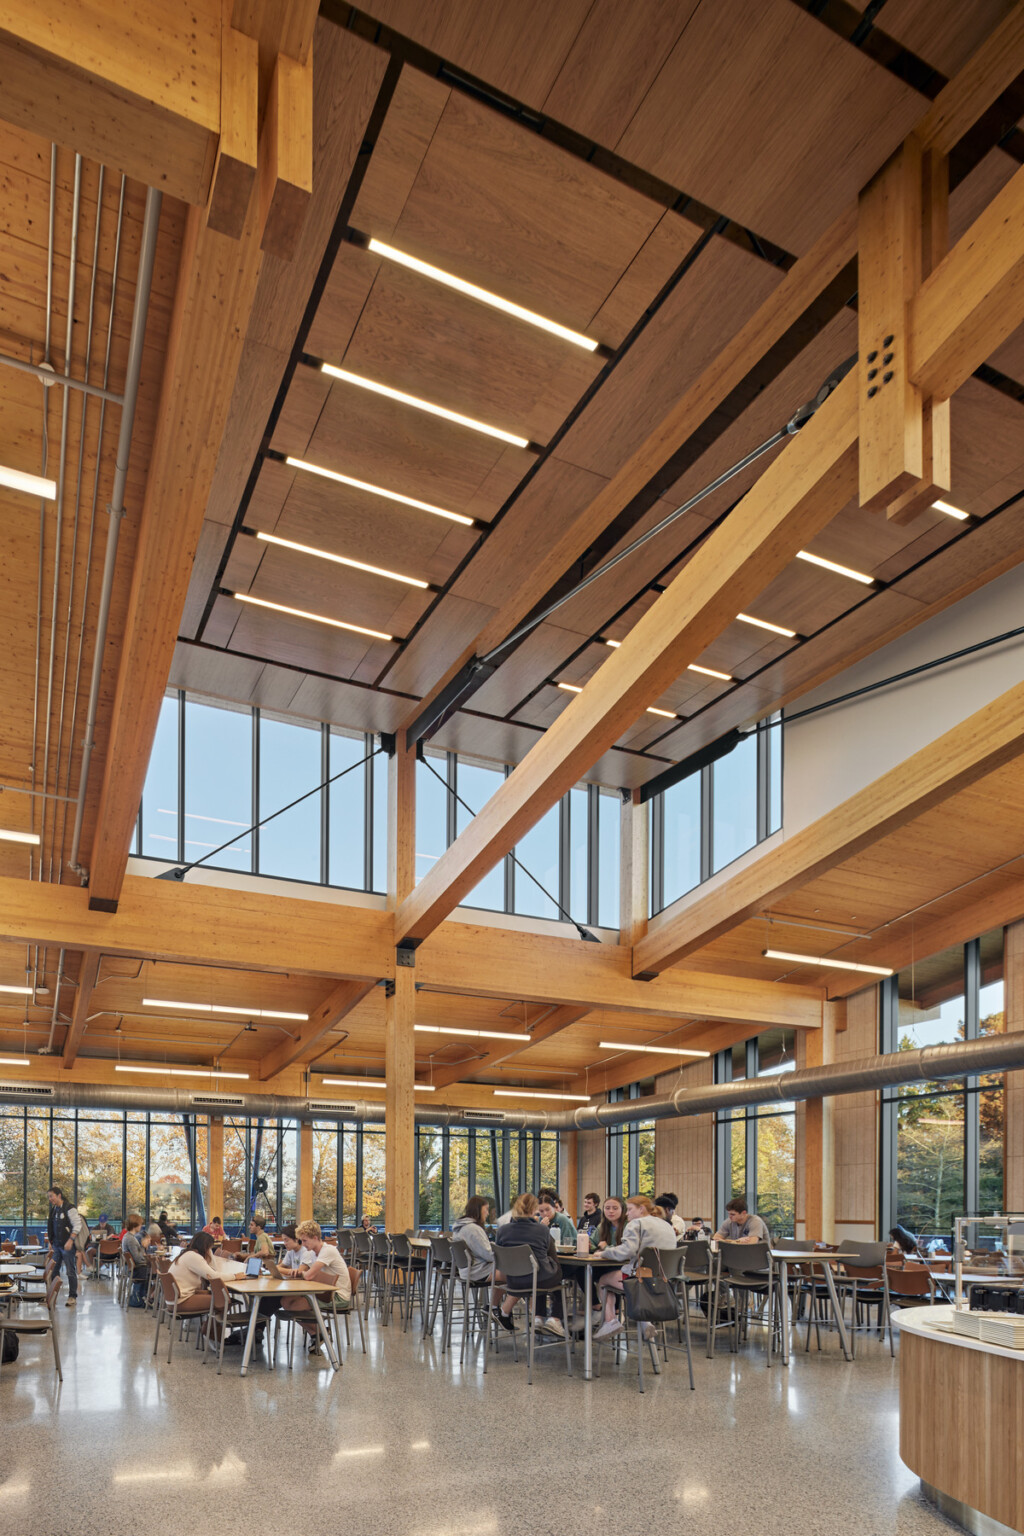 Main dining area with high mass timber wood ceiling with skylight and hanging wood slat details over mixed seating types